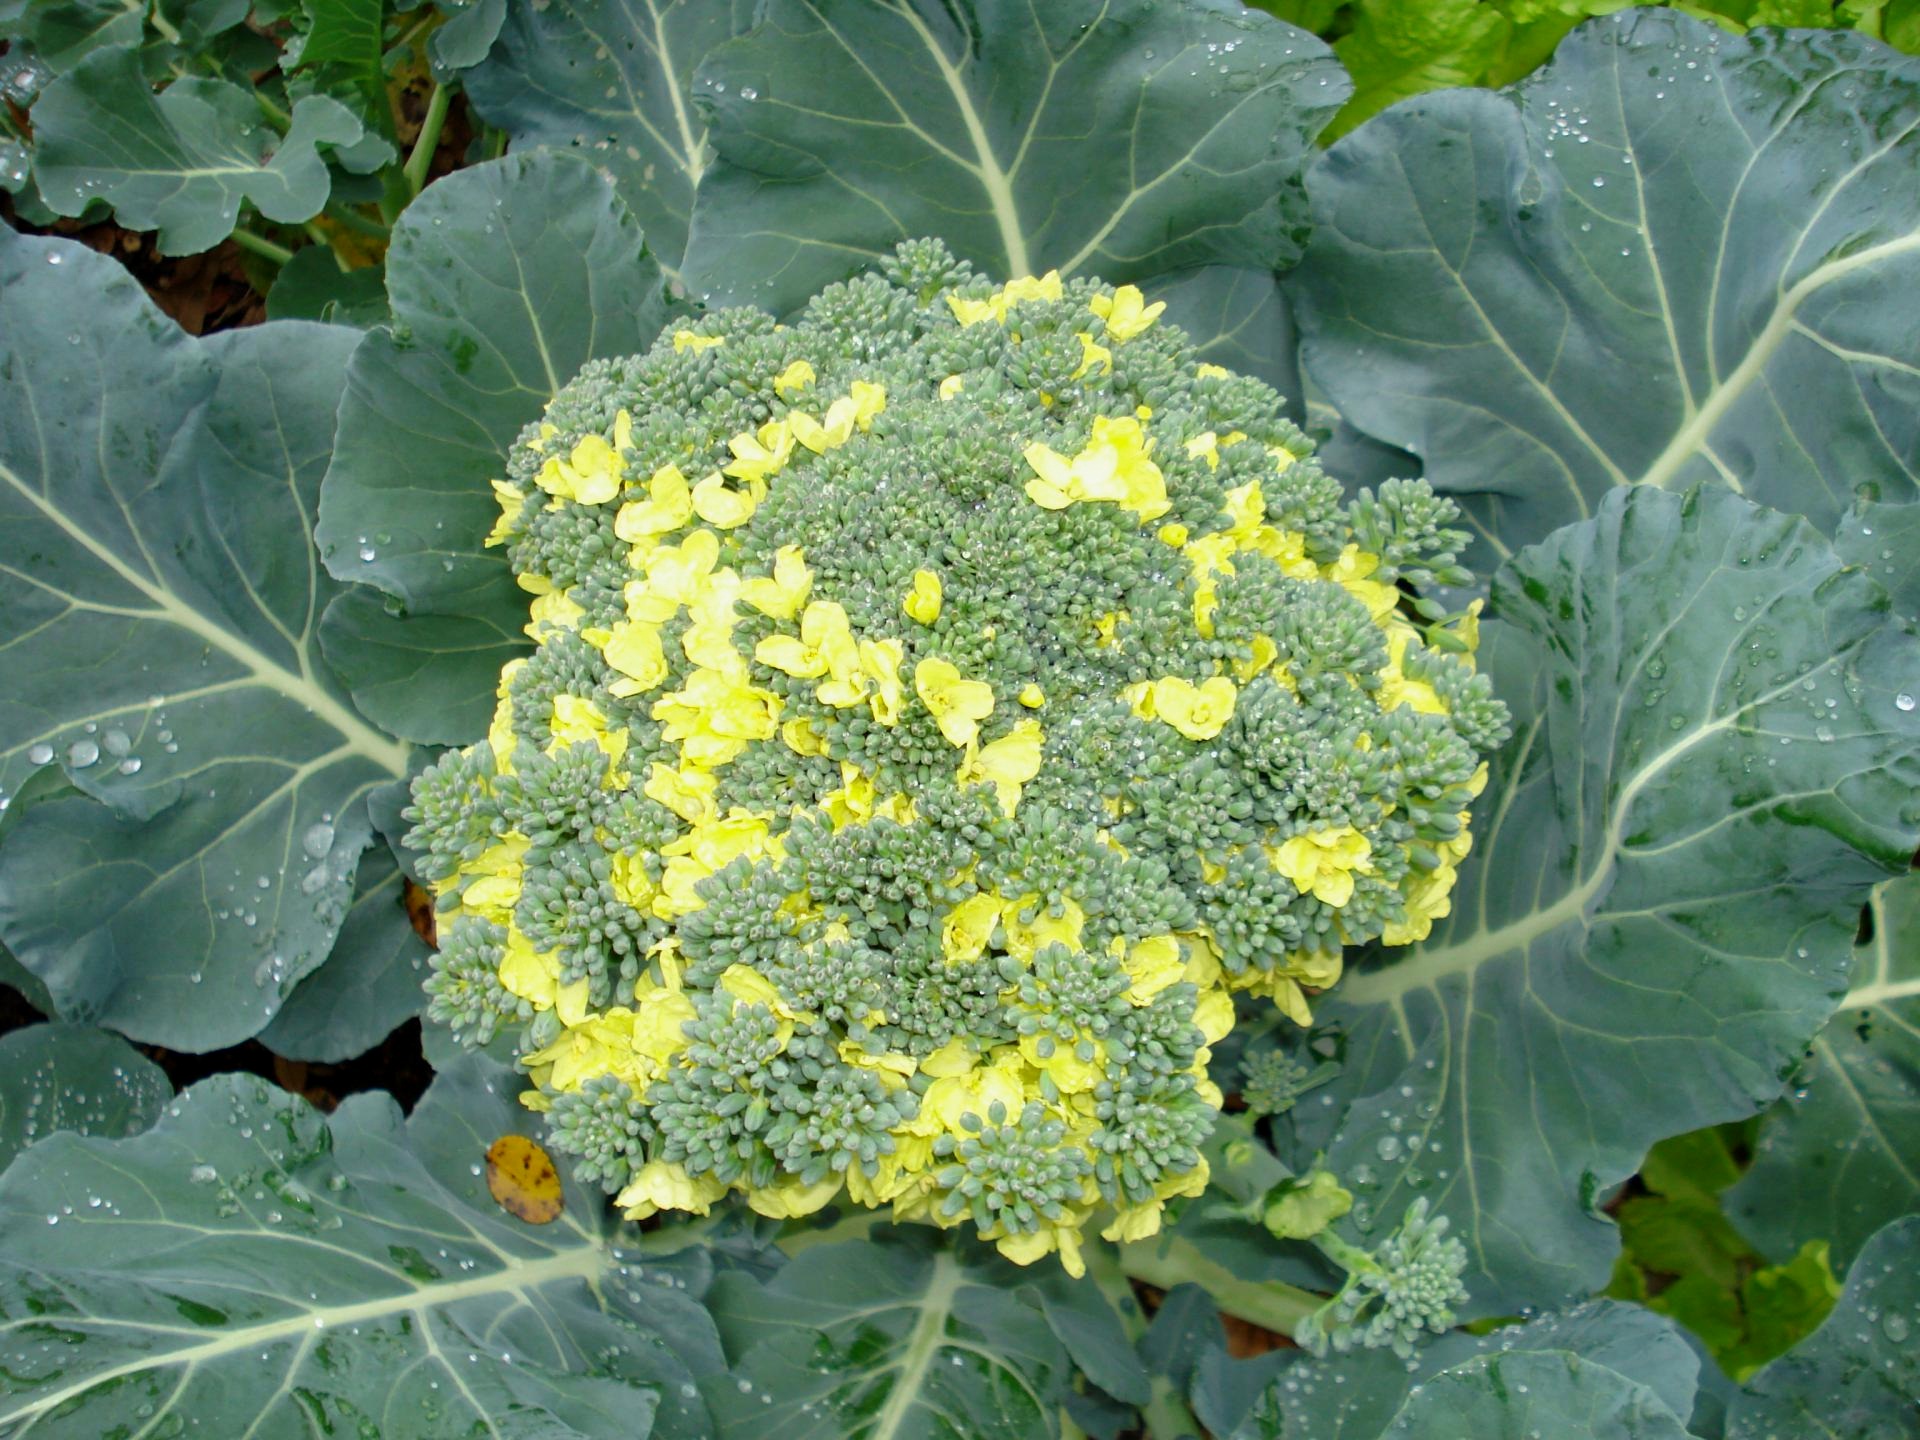 Growing broccoli seedlings: how to avoid common problems